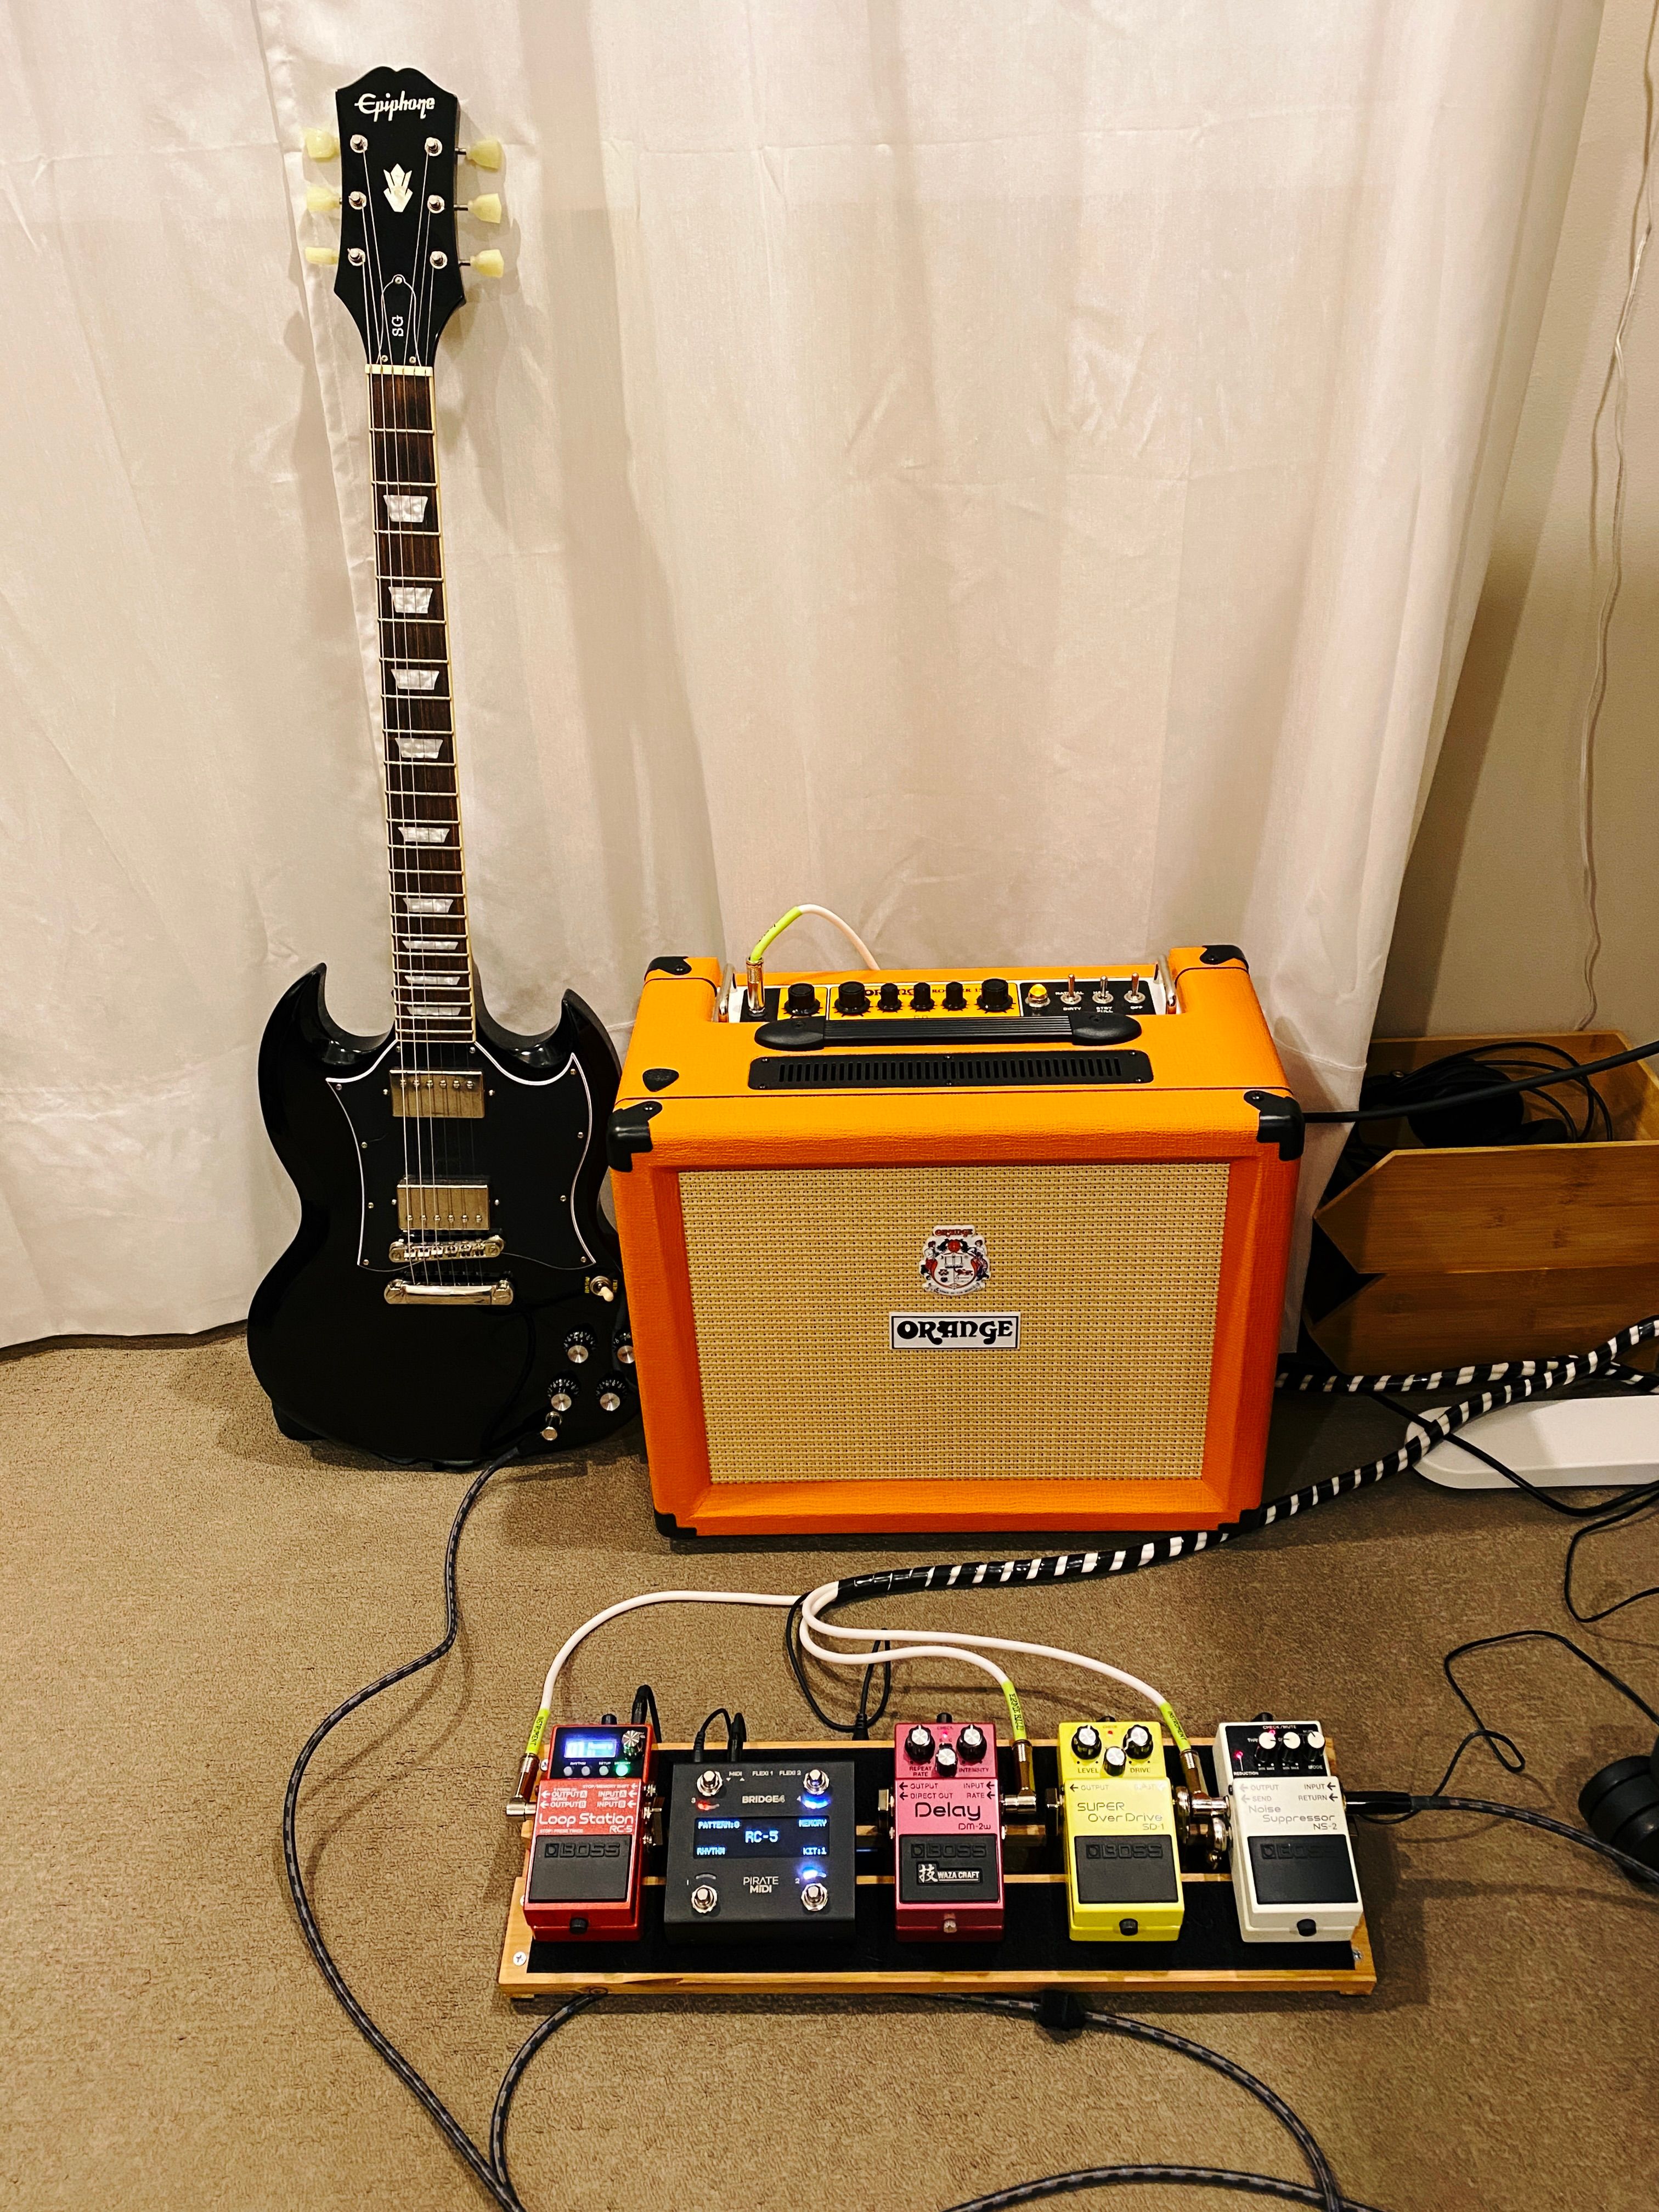 A photo of an Orange brand guitar amp (which is also actually orange-coloured, the Orange Rocker 15 Combo) sitting next to a shiny black electric guitar (an Epiphone SG Standard). In front of that on the floor is my DIY wooden guitar pedalboard with four Boss brand stomp pedals on it and a black "Pirate MIDI" brand MIDI controller pedal.